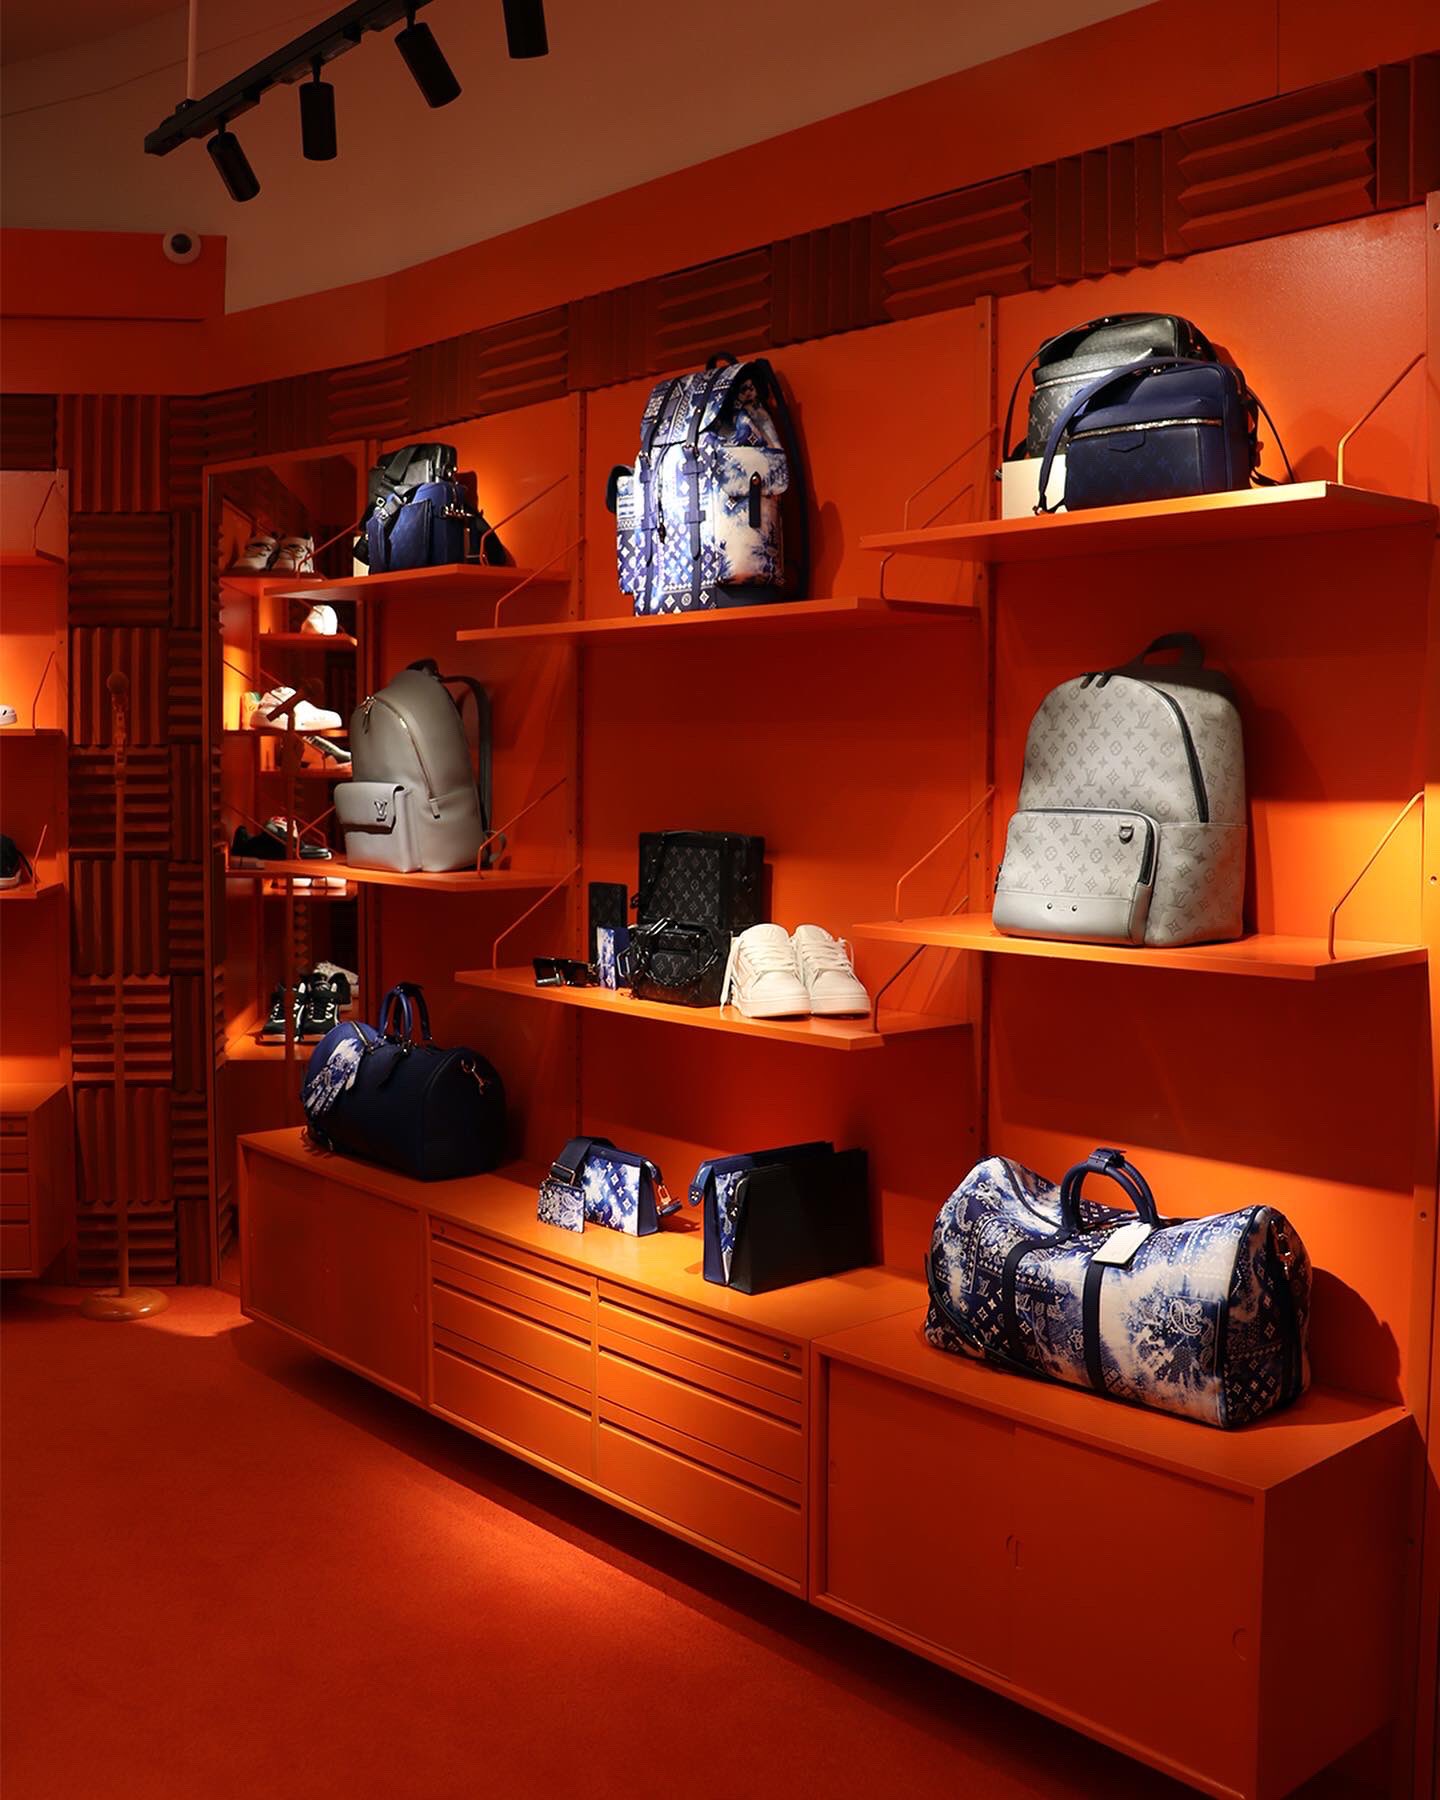 Brown Thomas on X: First Look. The new expansive Louis Vuitton